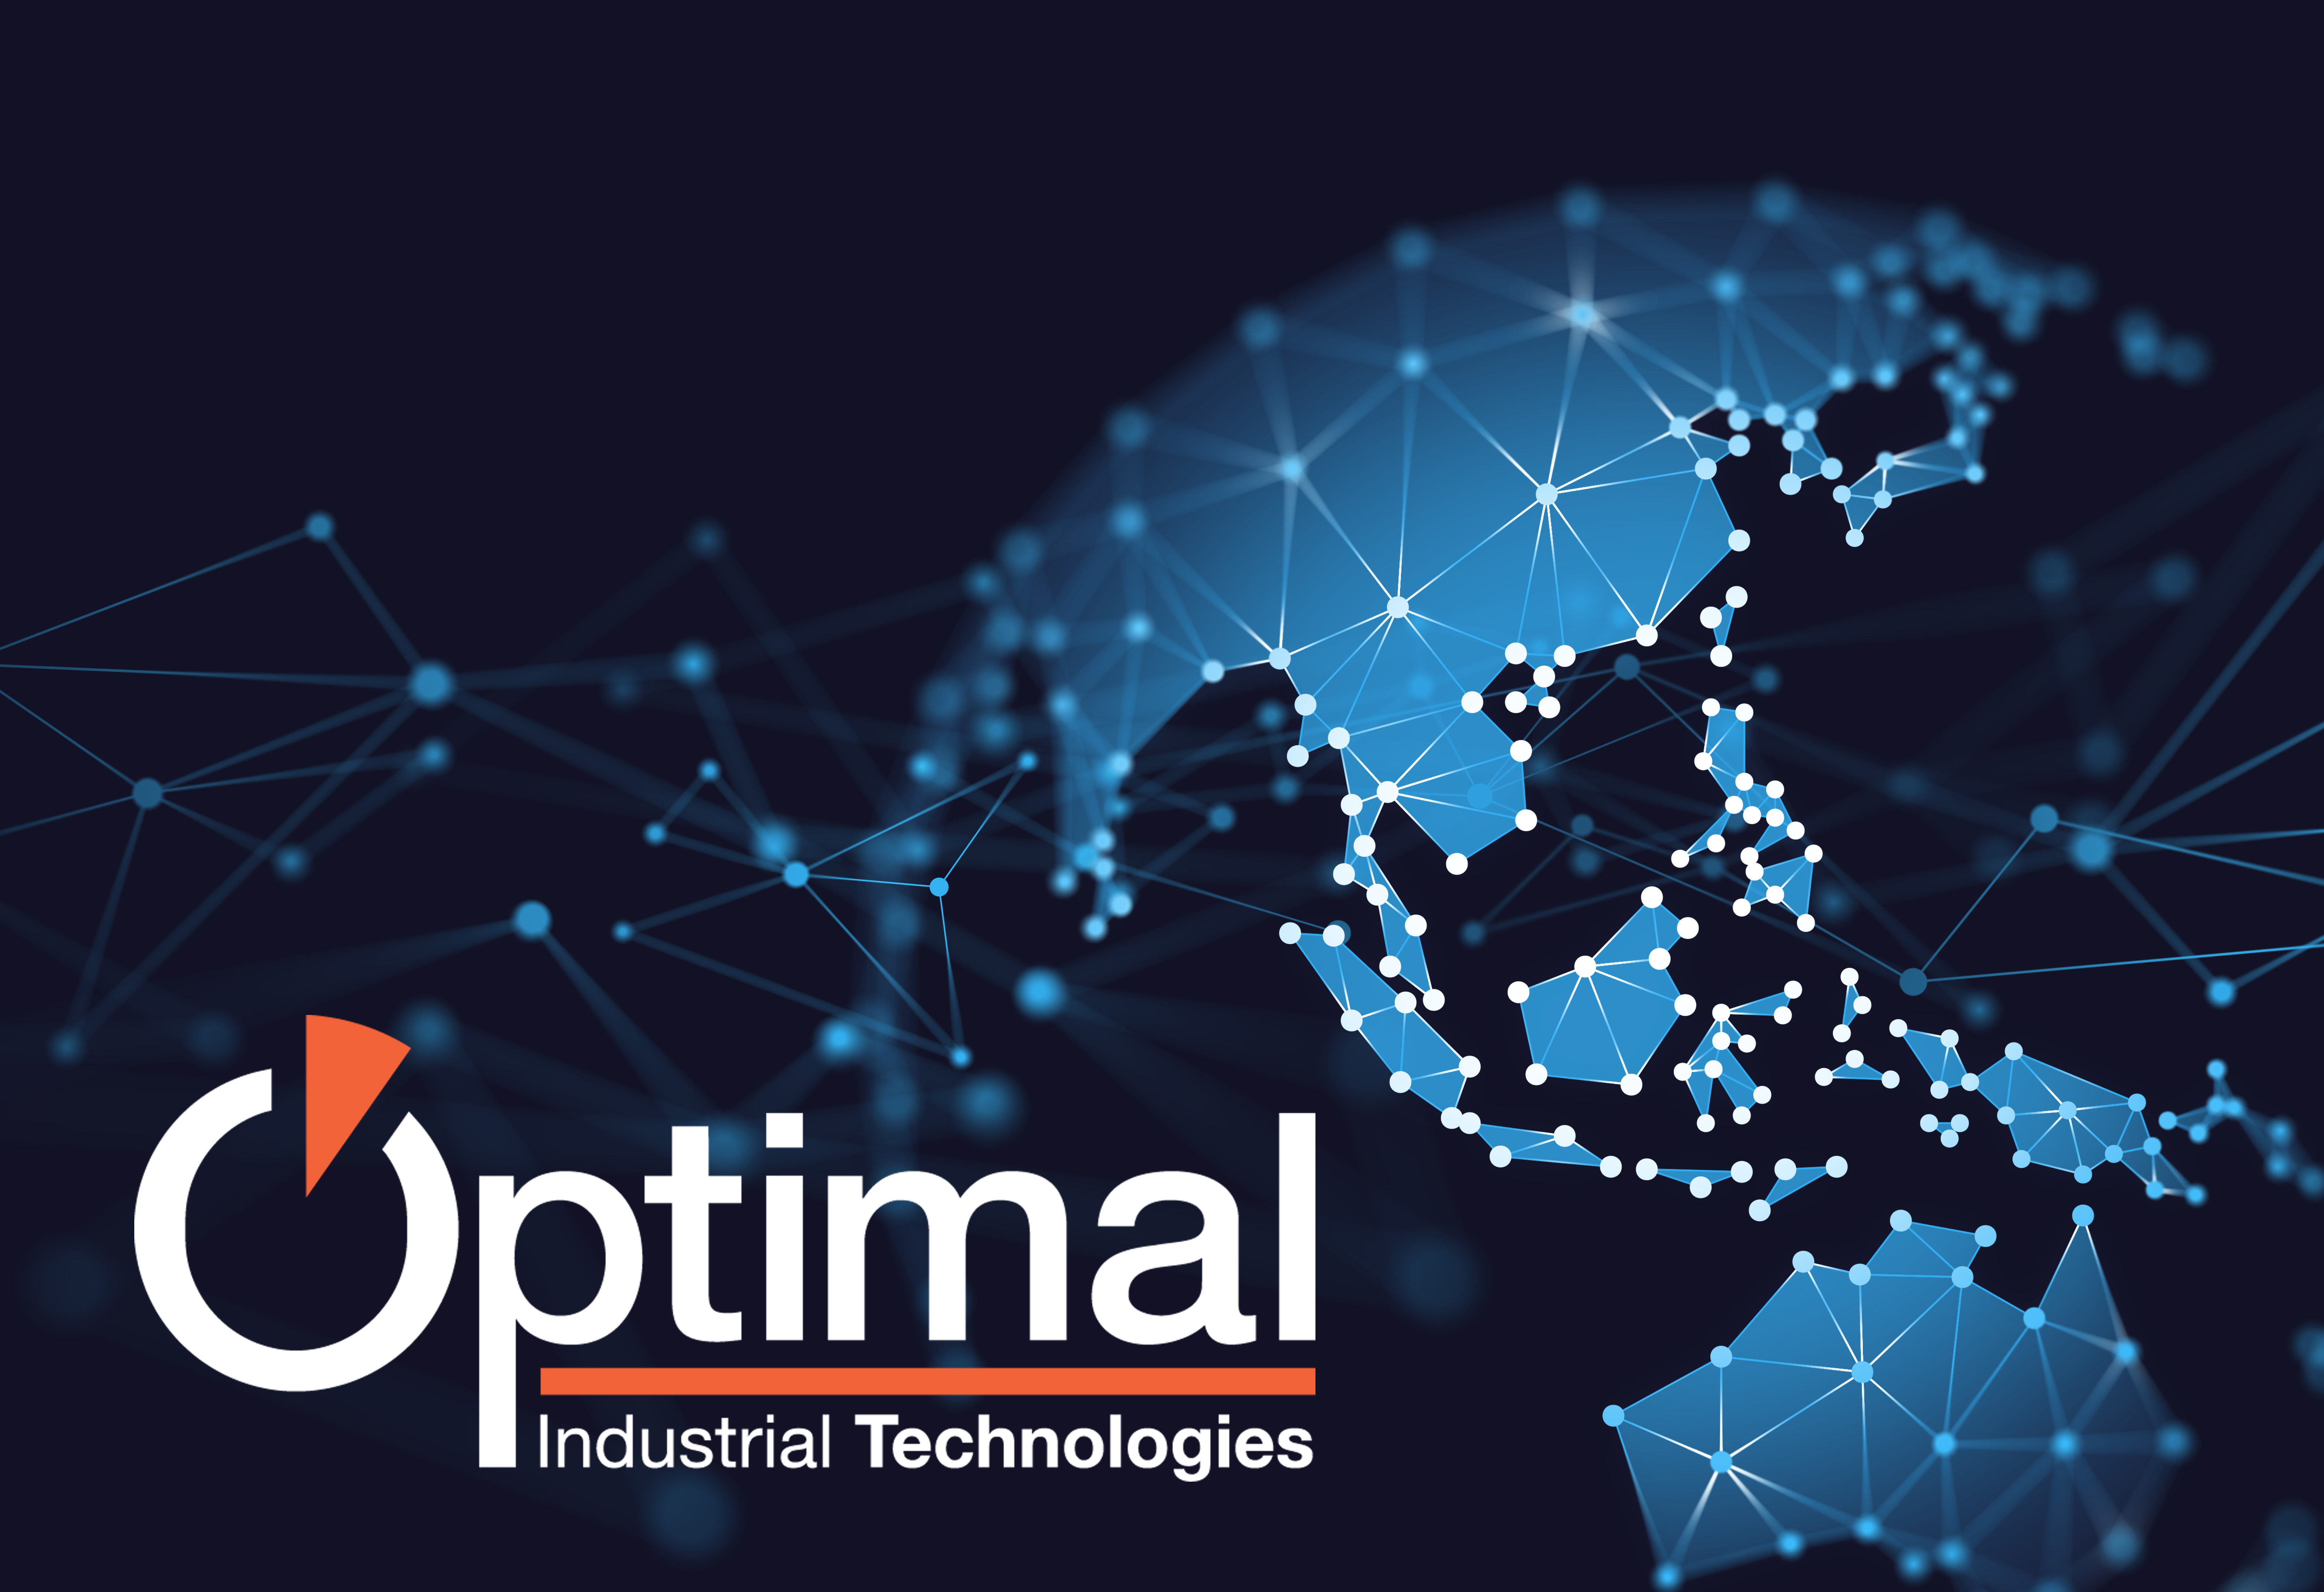 Optimal Industrial Technologies is expanding its presence in the Asia Pacific (APAC) region by making new appointments, enhancing its local support as well as strengthening strategic partnerships.